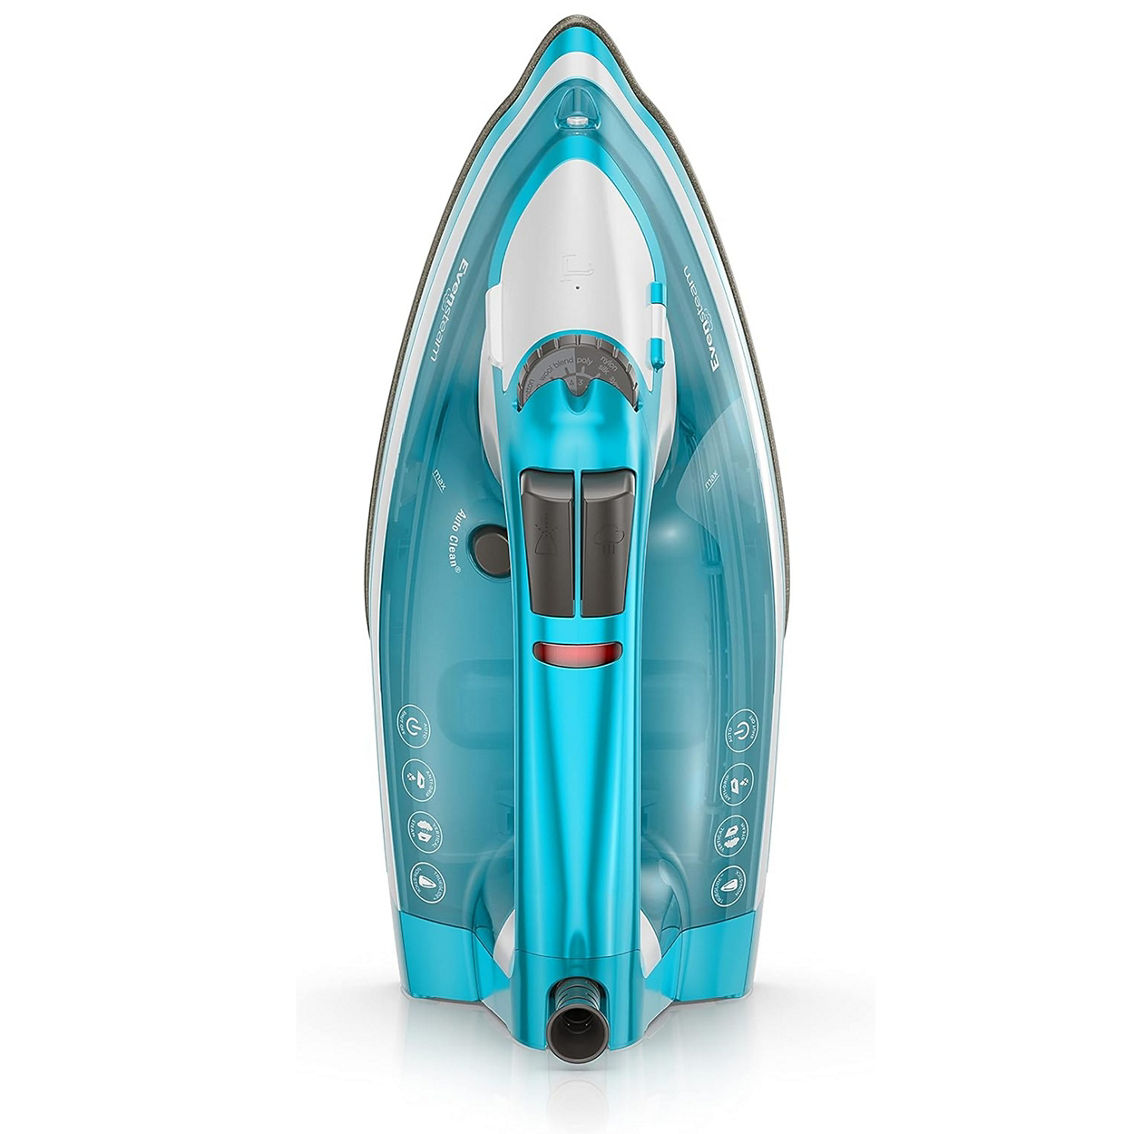 Black+Decker One Step Steam Iron in Turquoise - Image 3 of 4